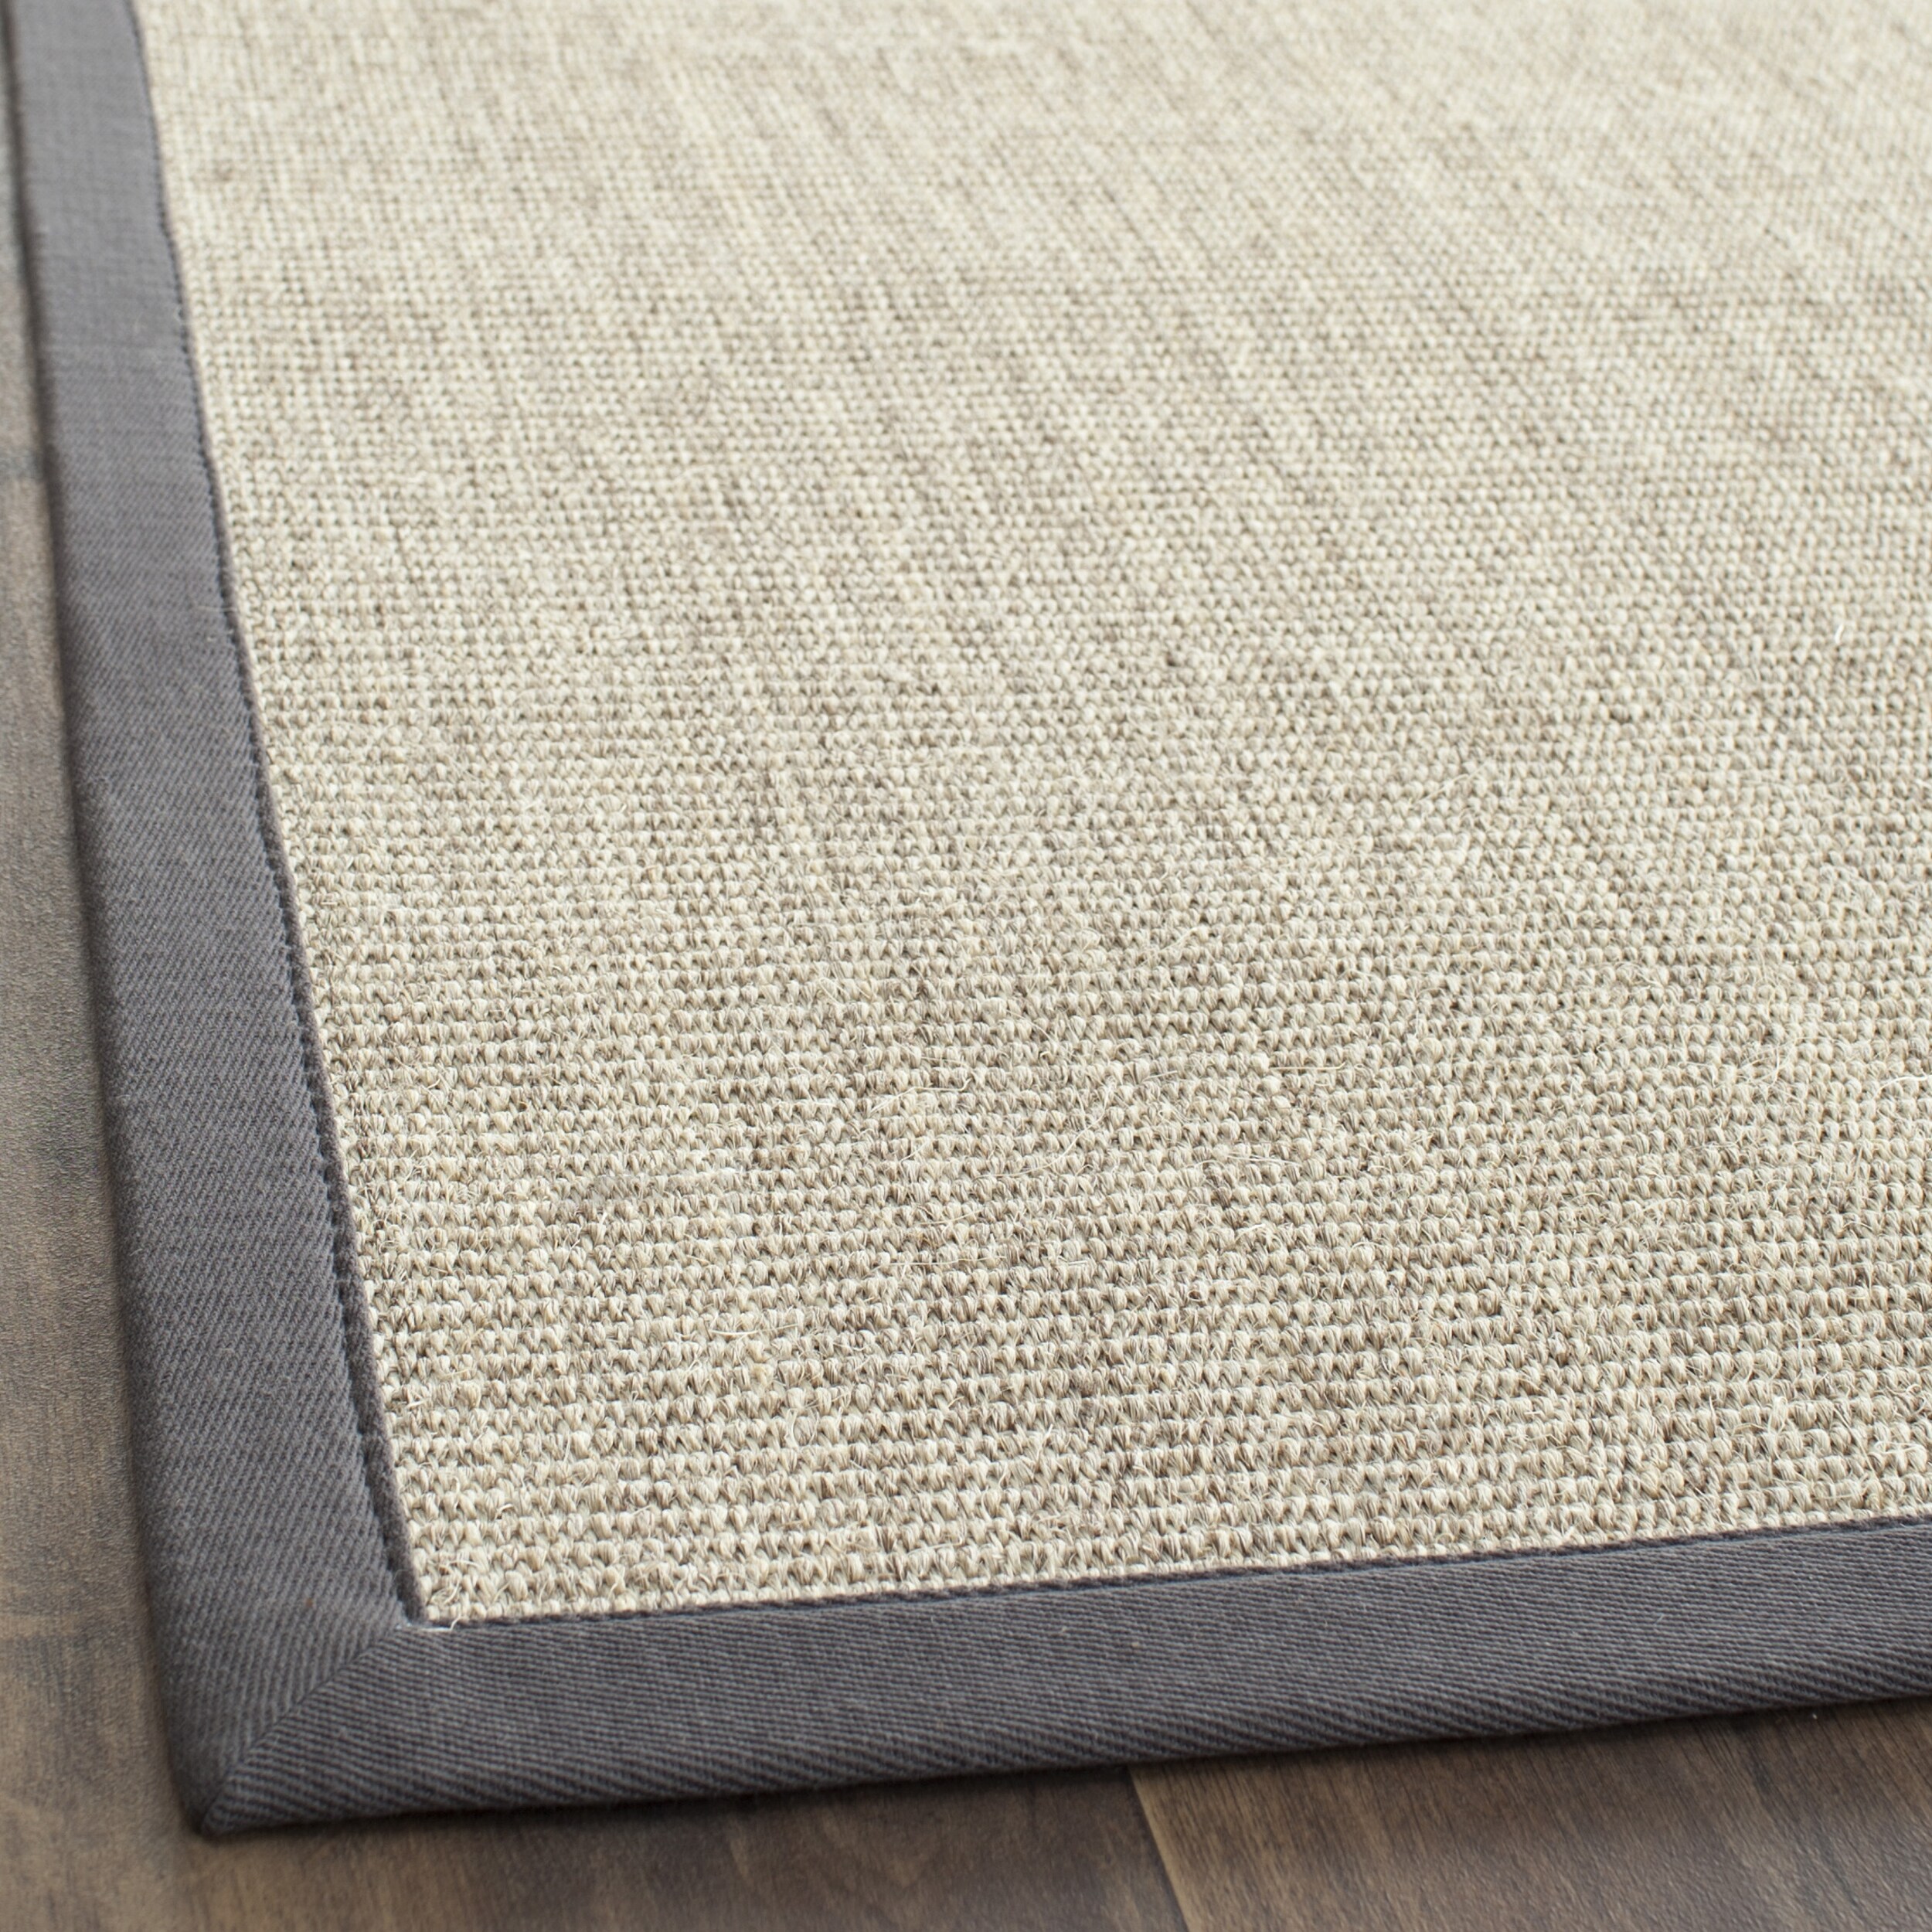 Hand woven Serenity Marble/ Grey Sisal Rug (2 6 x 10) Today $89.99